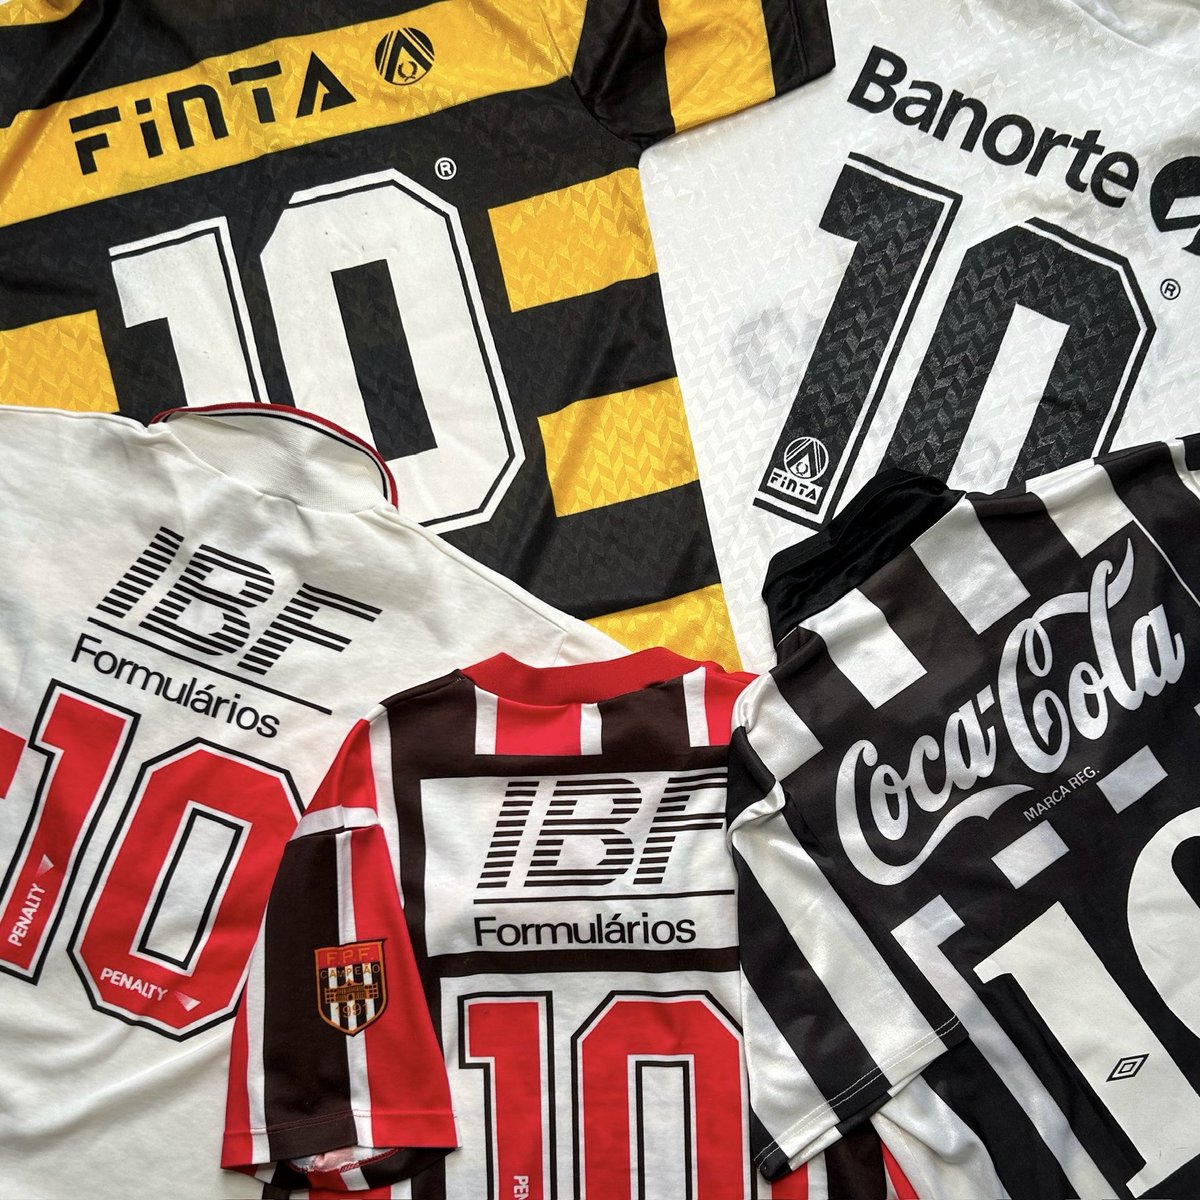 Another sensational delivery landed ahead of next months drop👀

A heavy Brazilian and No.10 theme to this one with a few other classics dropped in!💥

Which is your favourite?🤔

#footballshirt #football #fashion